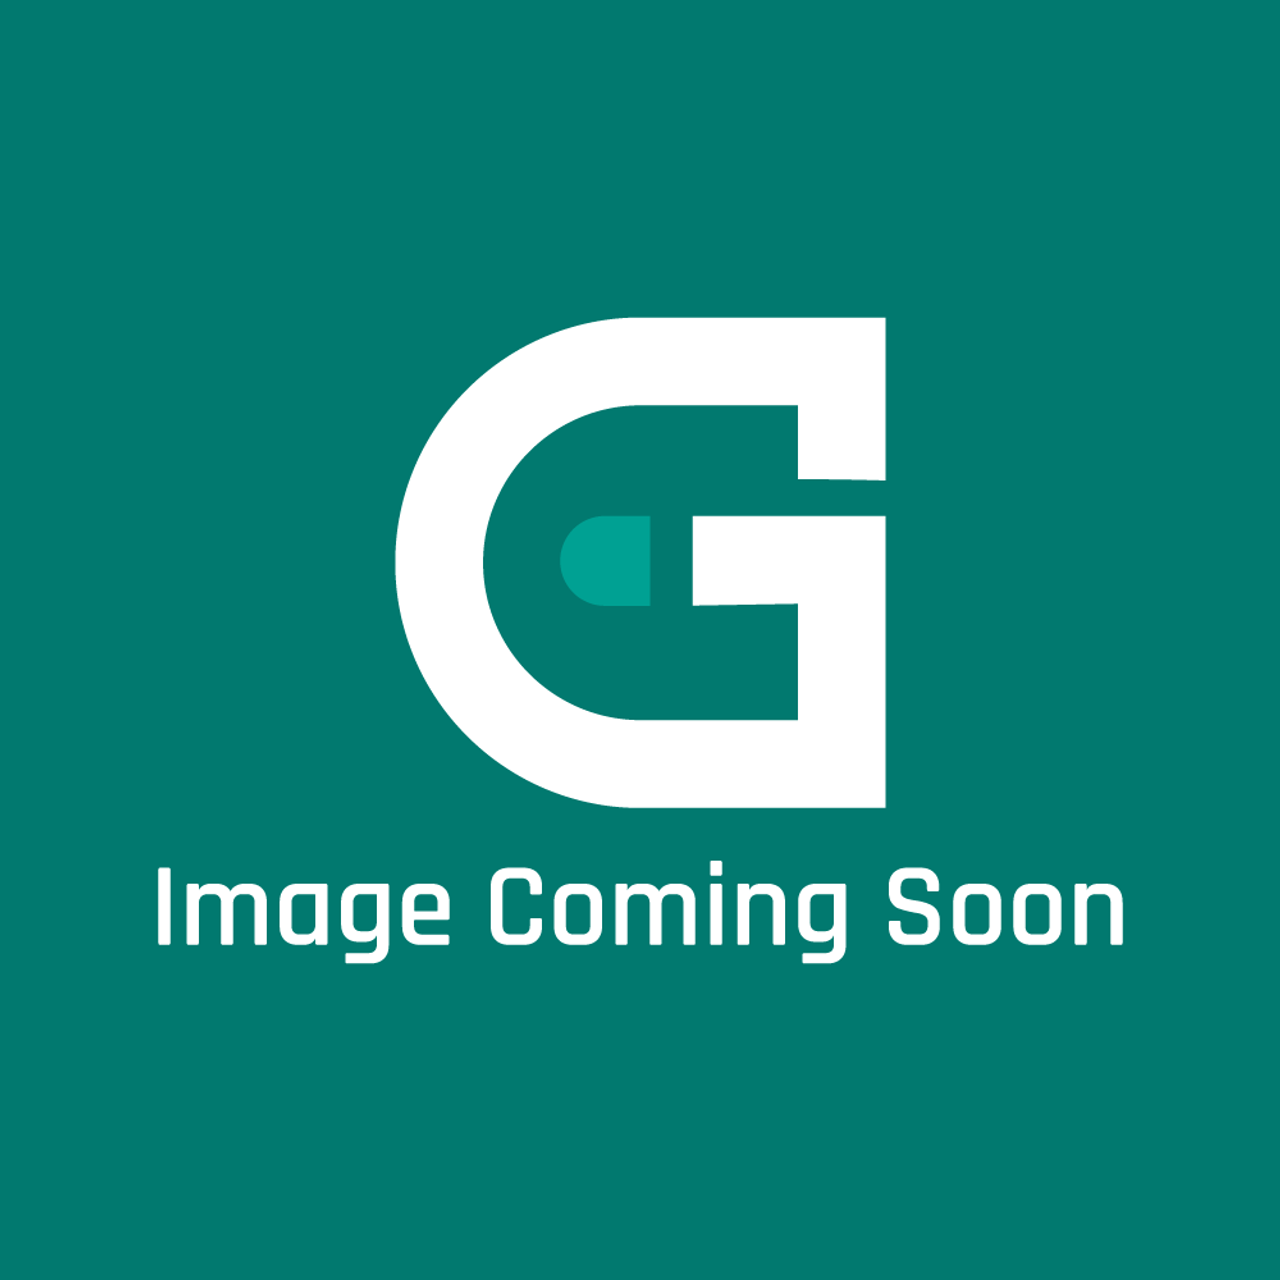 Frigidaire - Electrolux 316577059 Controller - Image Coming Soon!